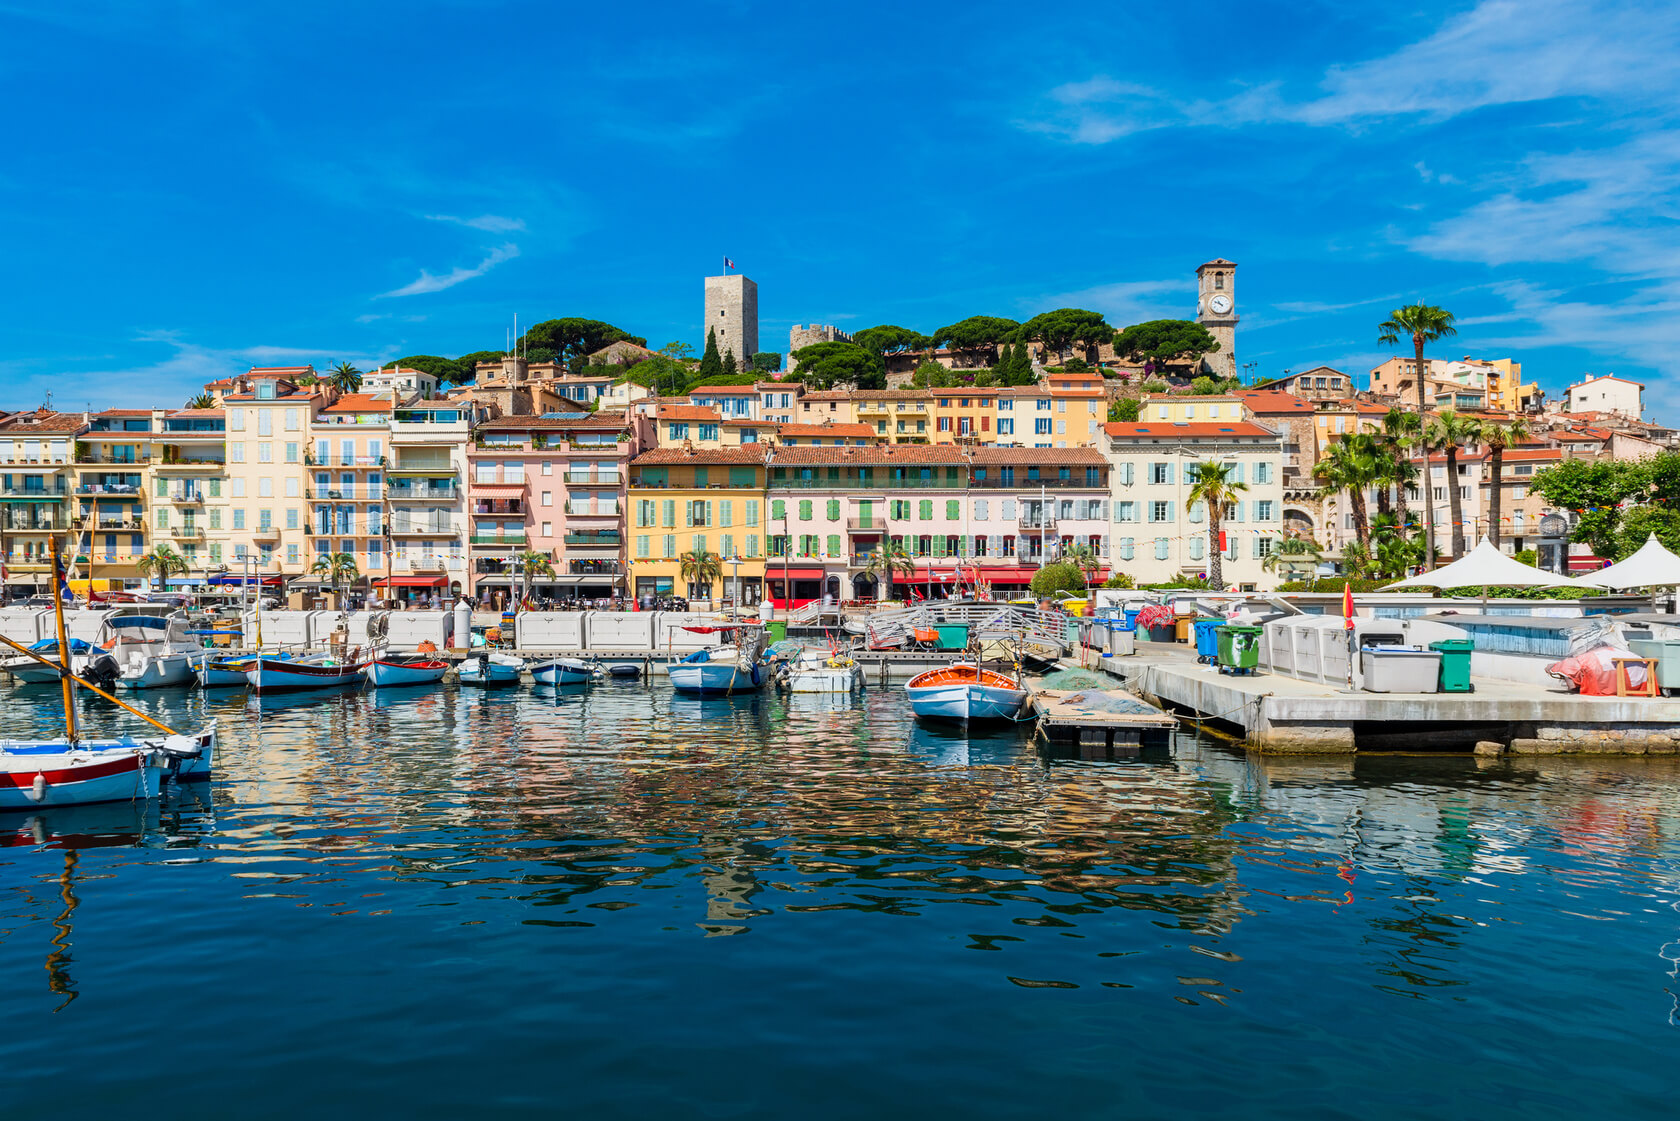 Marina and City Center of Cannes, Southern France.